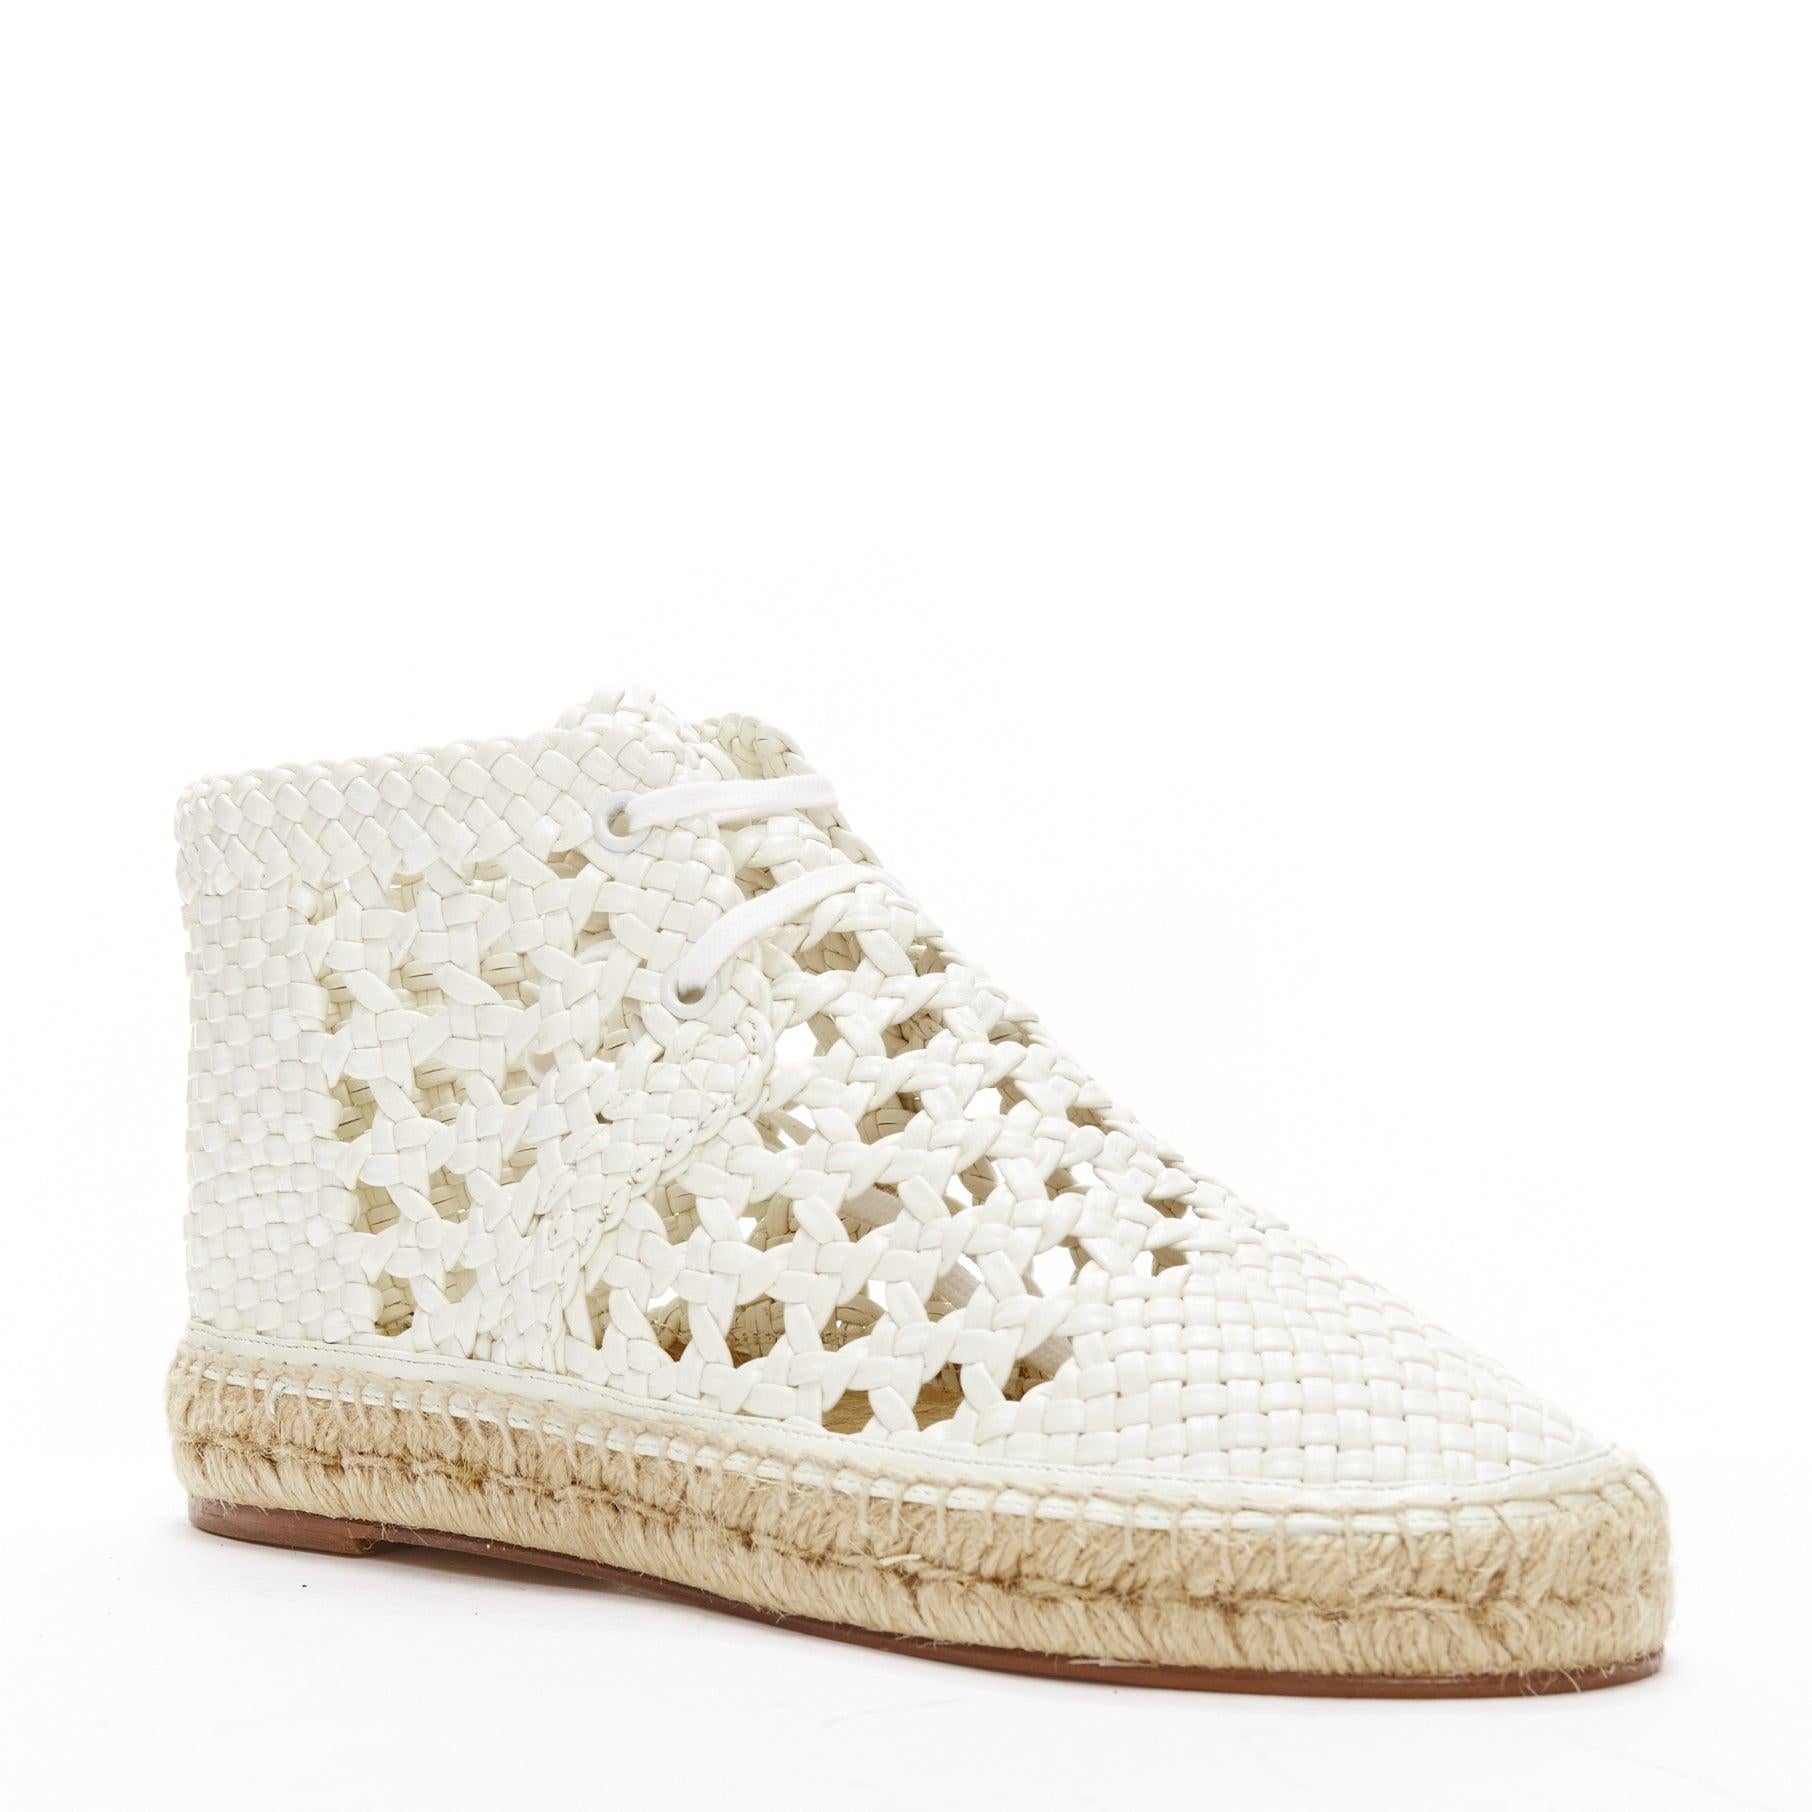 OLD CELINE Phoebe Philo white woven basket leather espadrille ankle boots EU38
Reference: BSHW/A00143
Brand: Celine
Designer: Phoebe Philo
Material: Leather
Color: White, Beige
Pattern: Solid
Closure: Lace Up
Lining: White Leather
Extra Details: